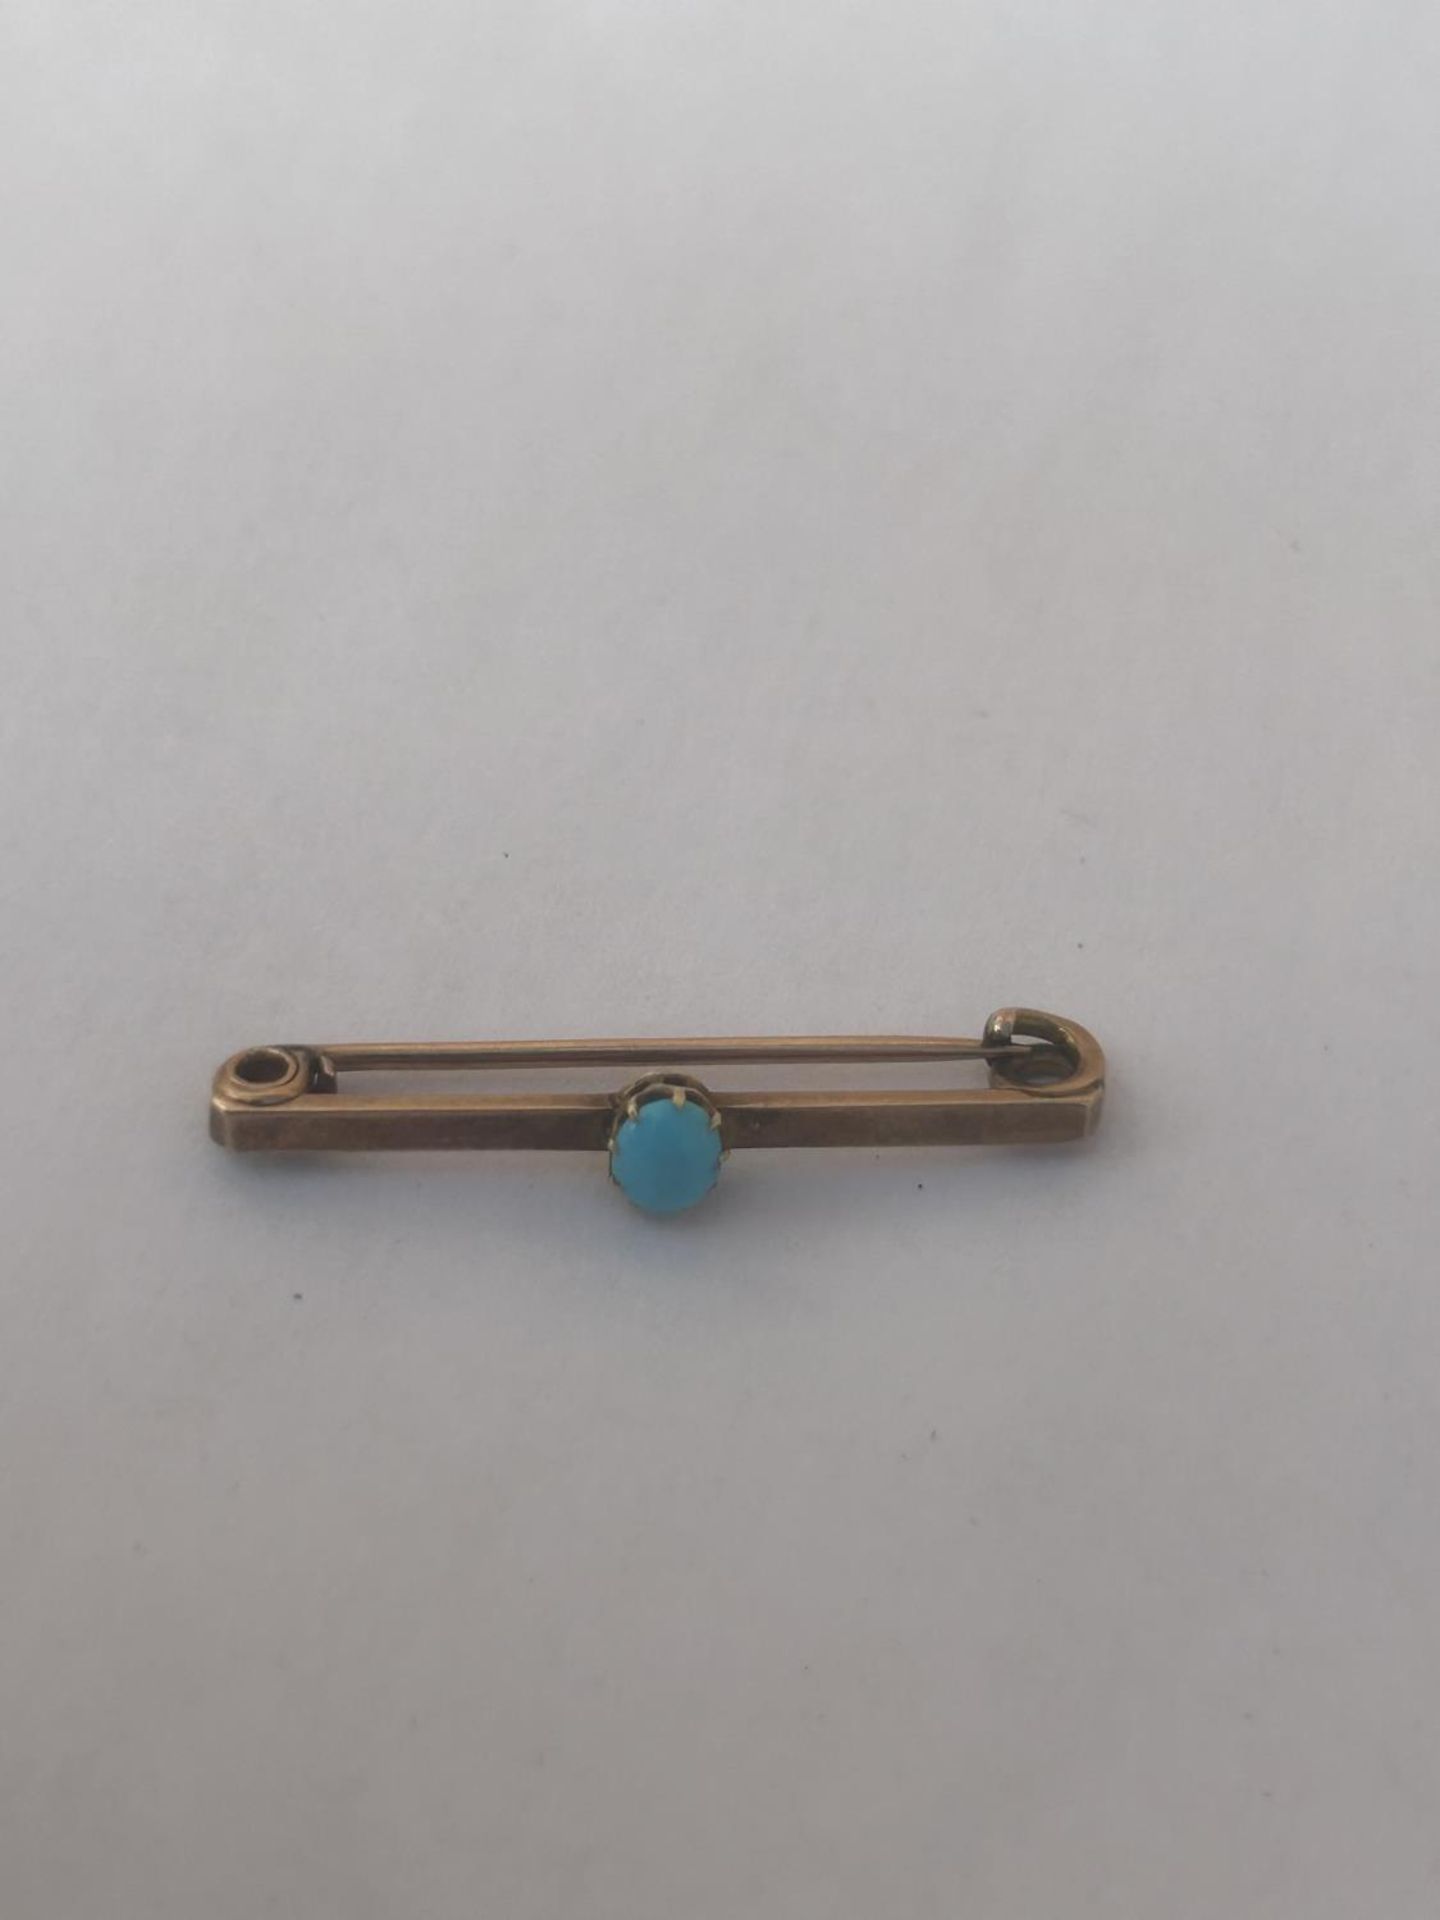 A VINTAGE 14CT GOLD AND SAPPHIRE STICK PIN MARKED 585, WITH A VINTAGE UNMARKED YELLOW BROOCH WITH - Image 4 of 4